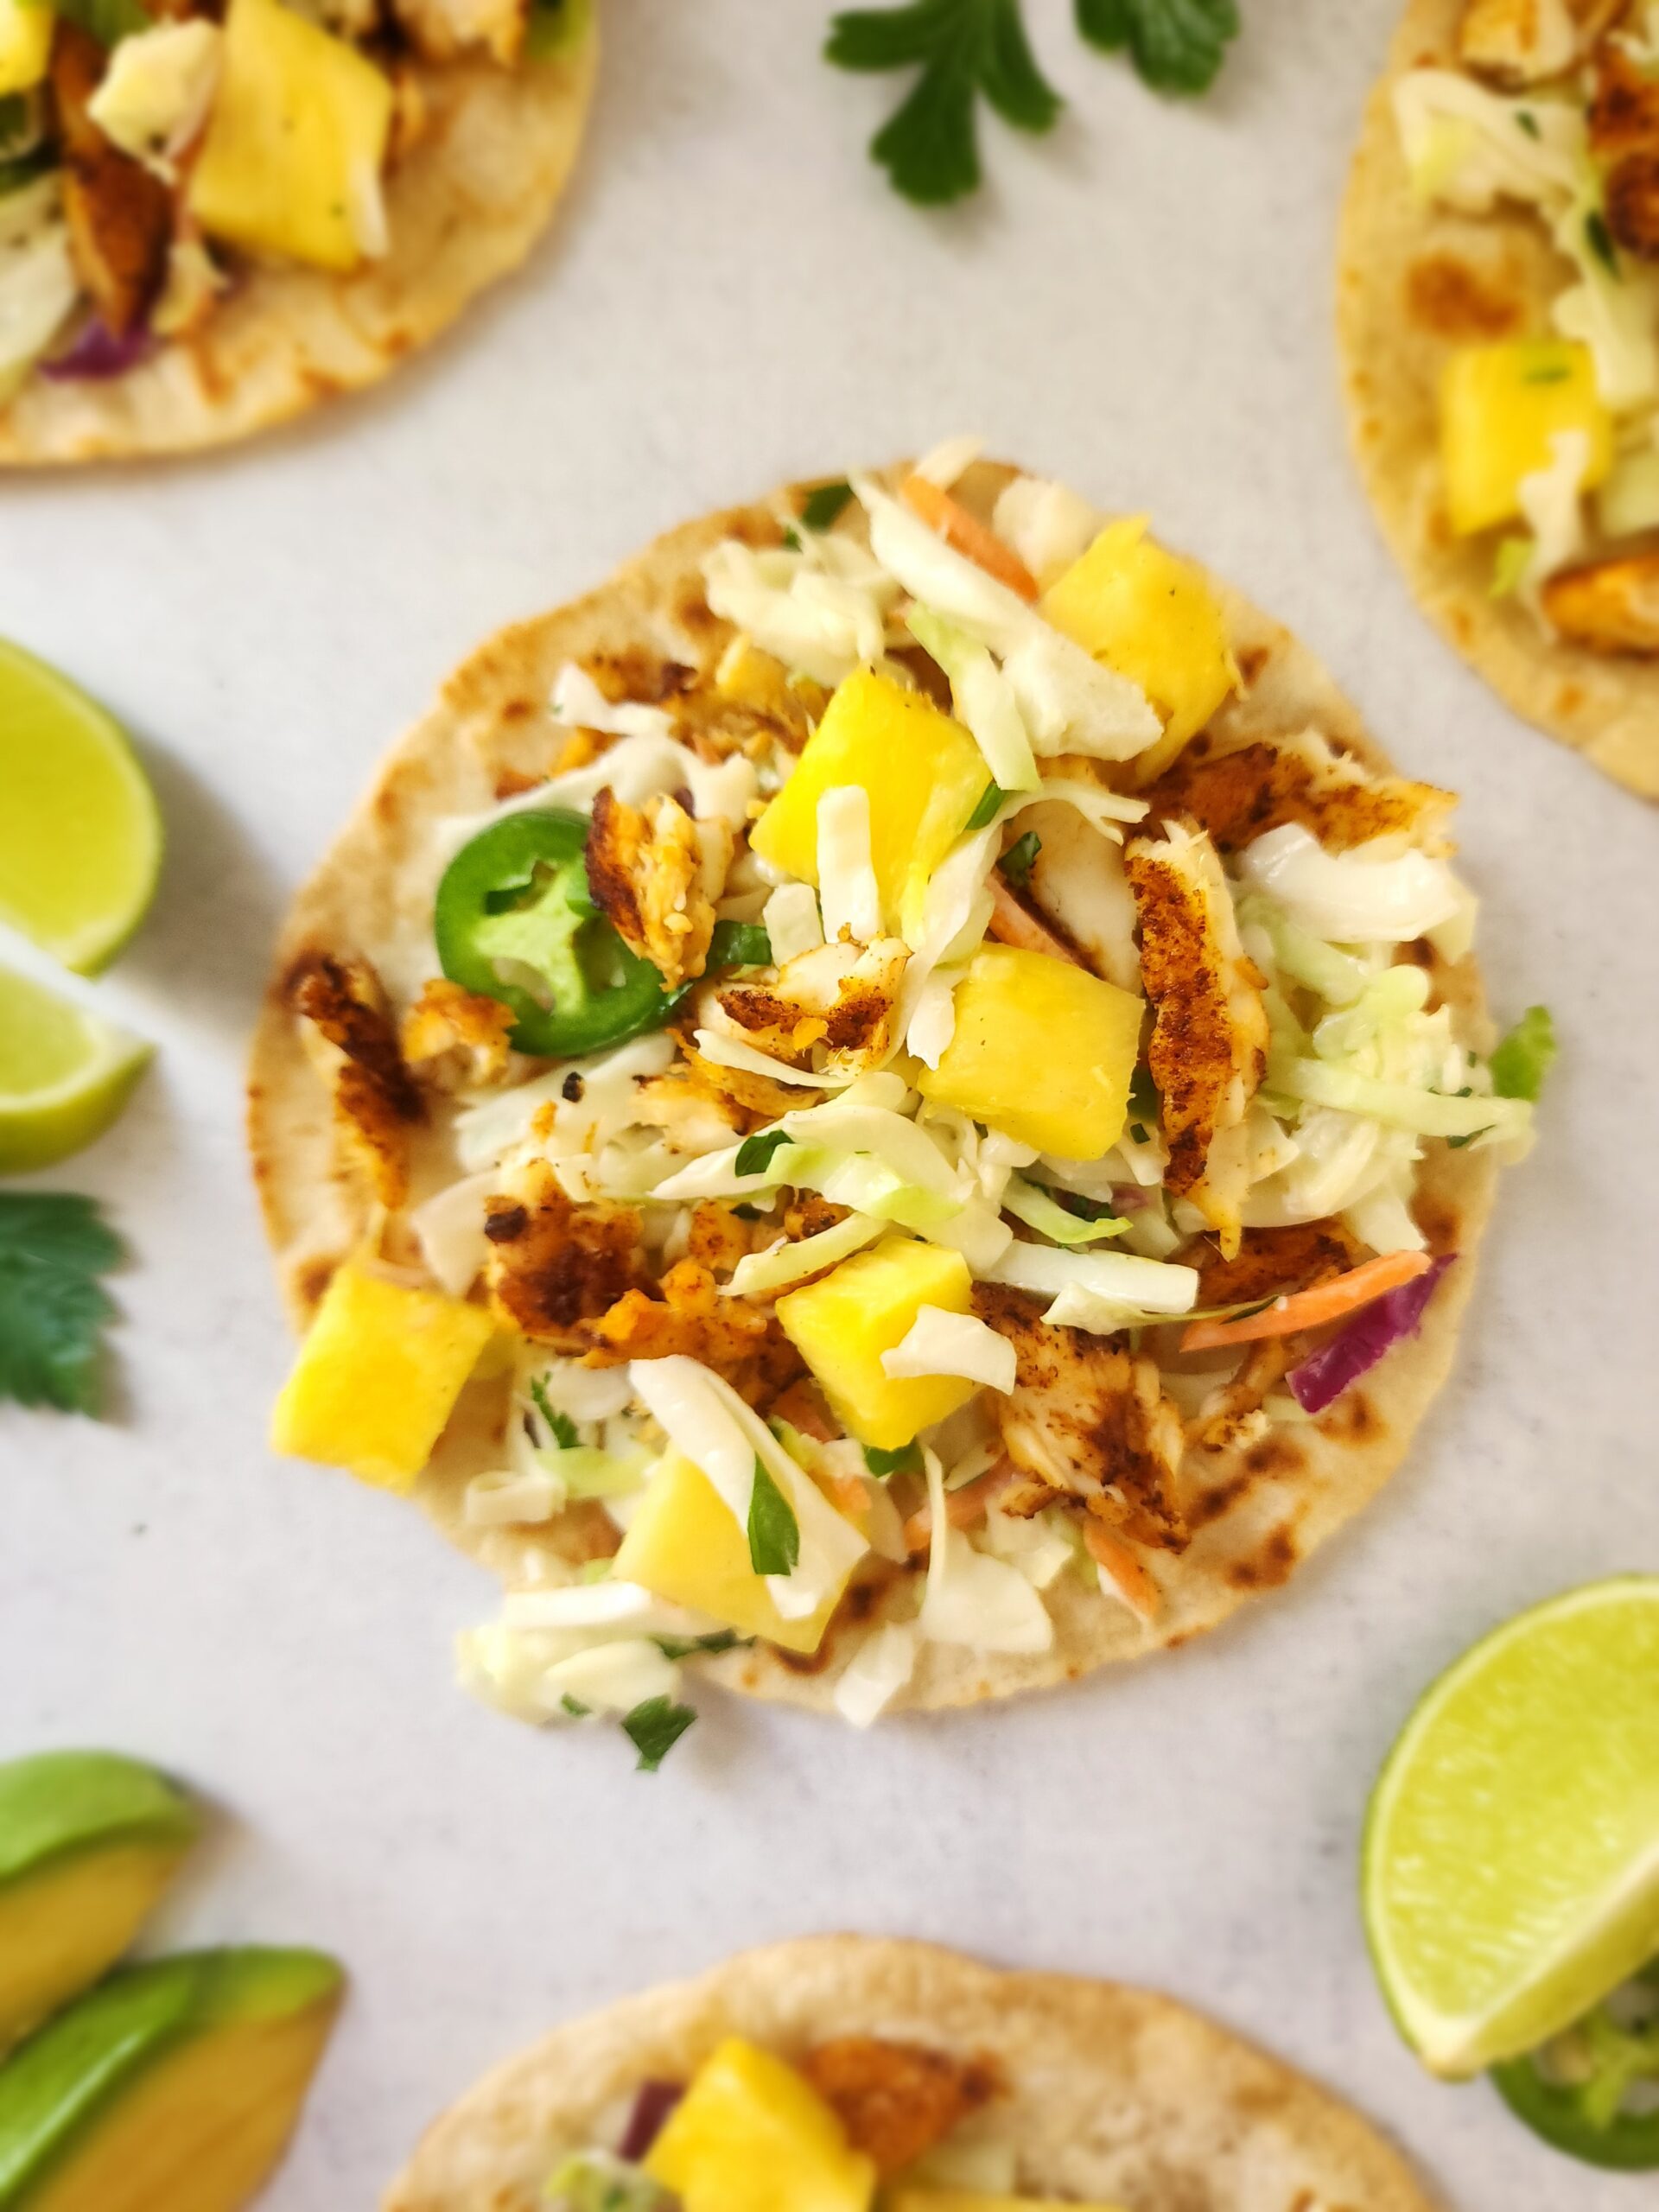 Blackened Fish Tacos with Pineapple Salsa and Slaw